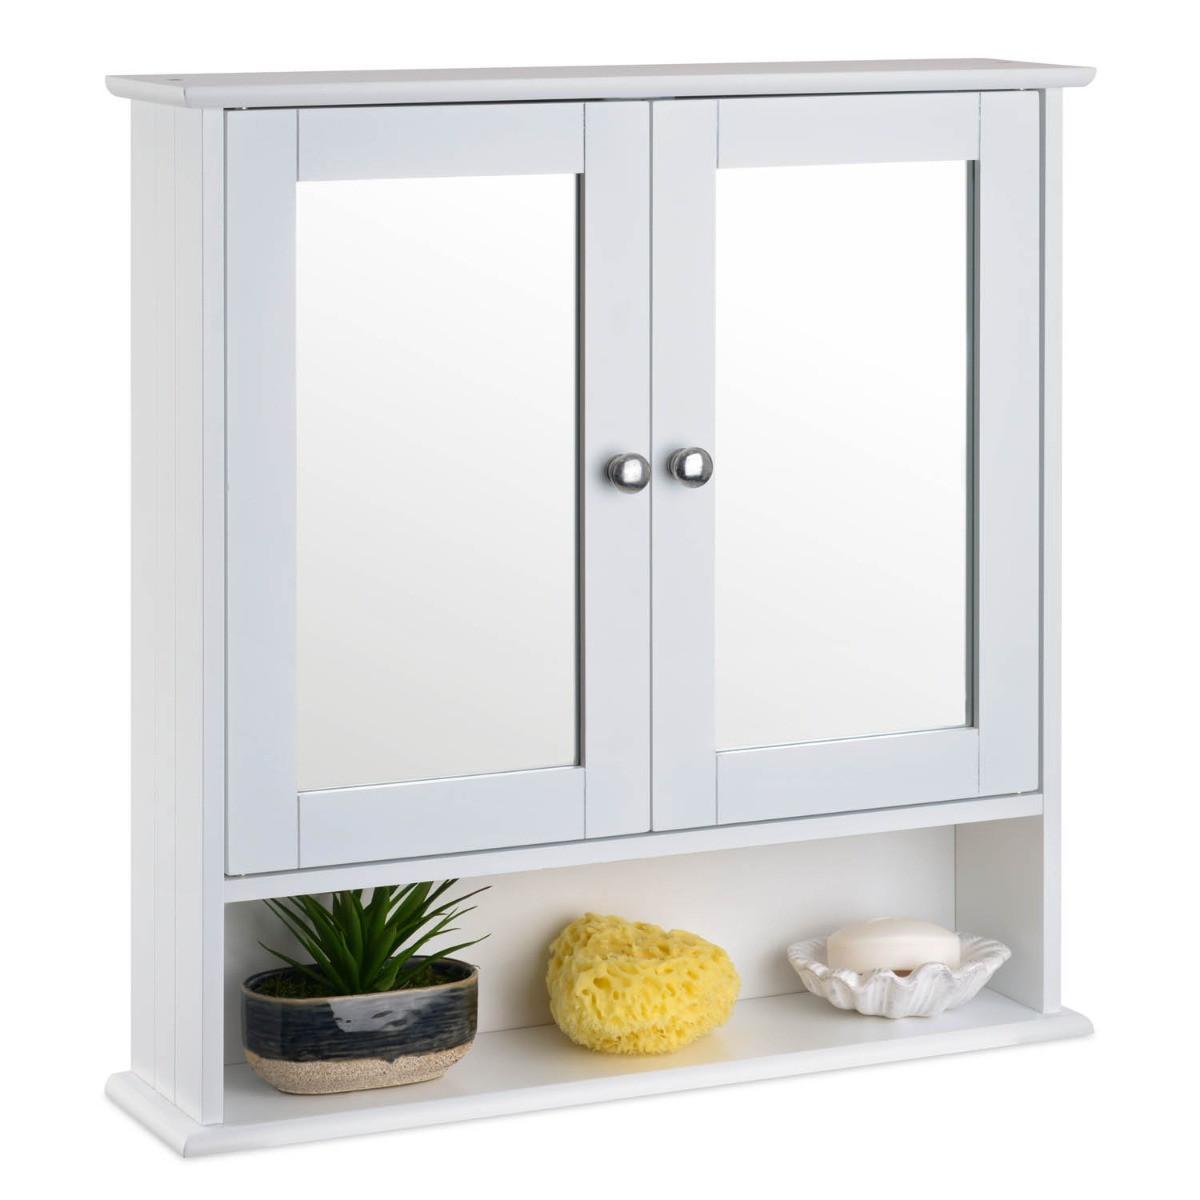 White Bathroom Wall Shelf
 Bathroom Mirrored Cabinet White Wooden Double Wall Mounted